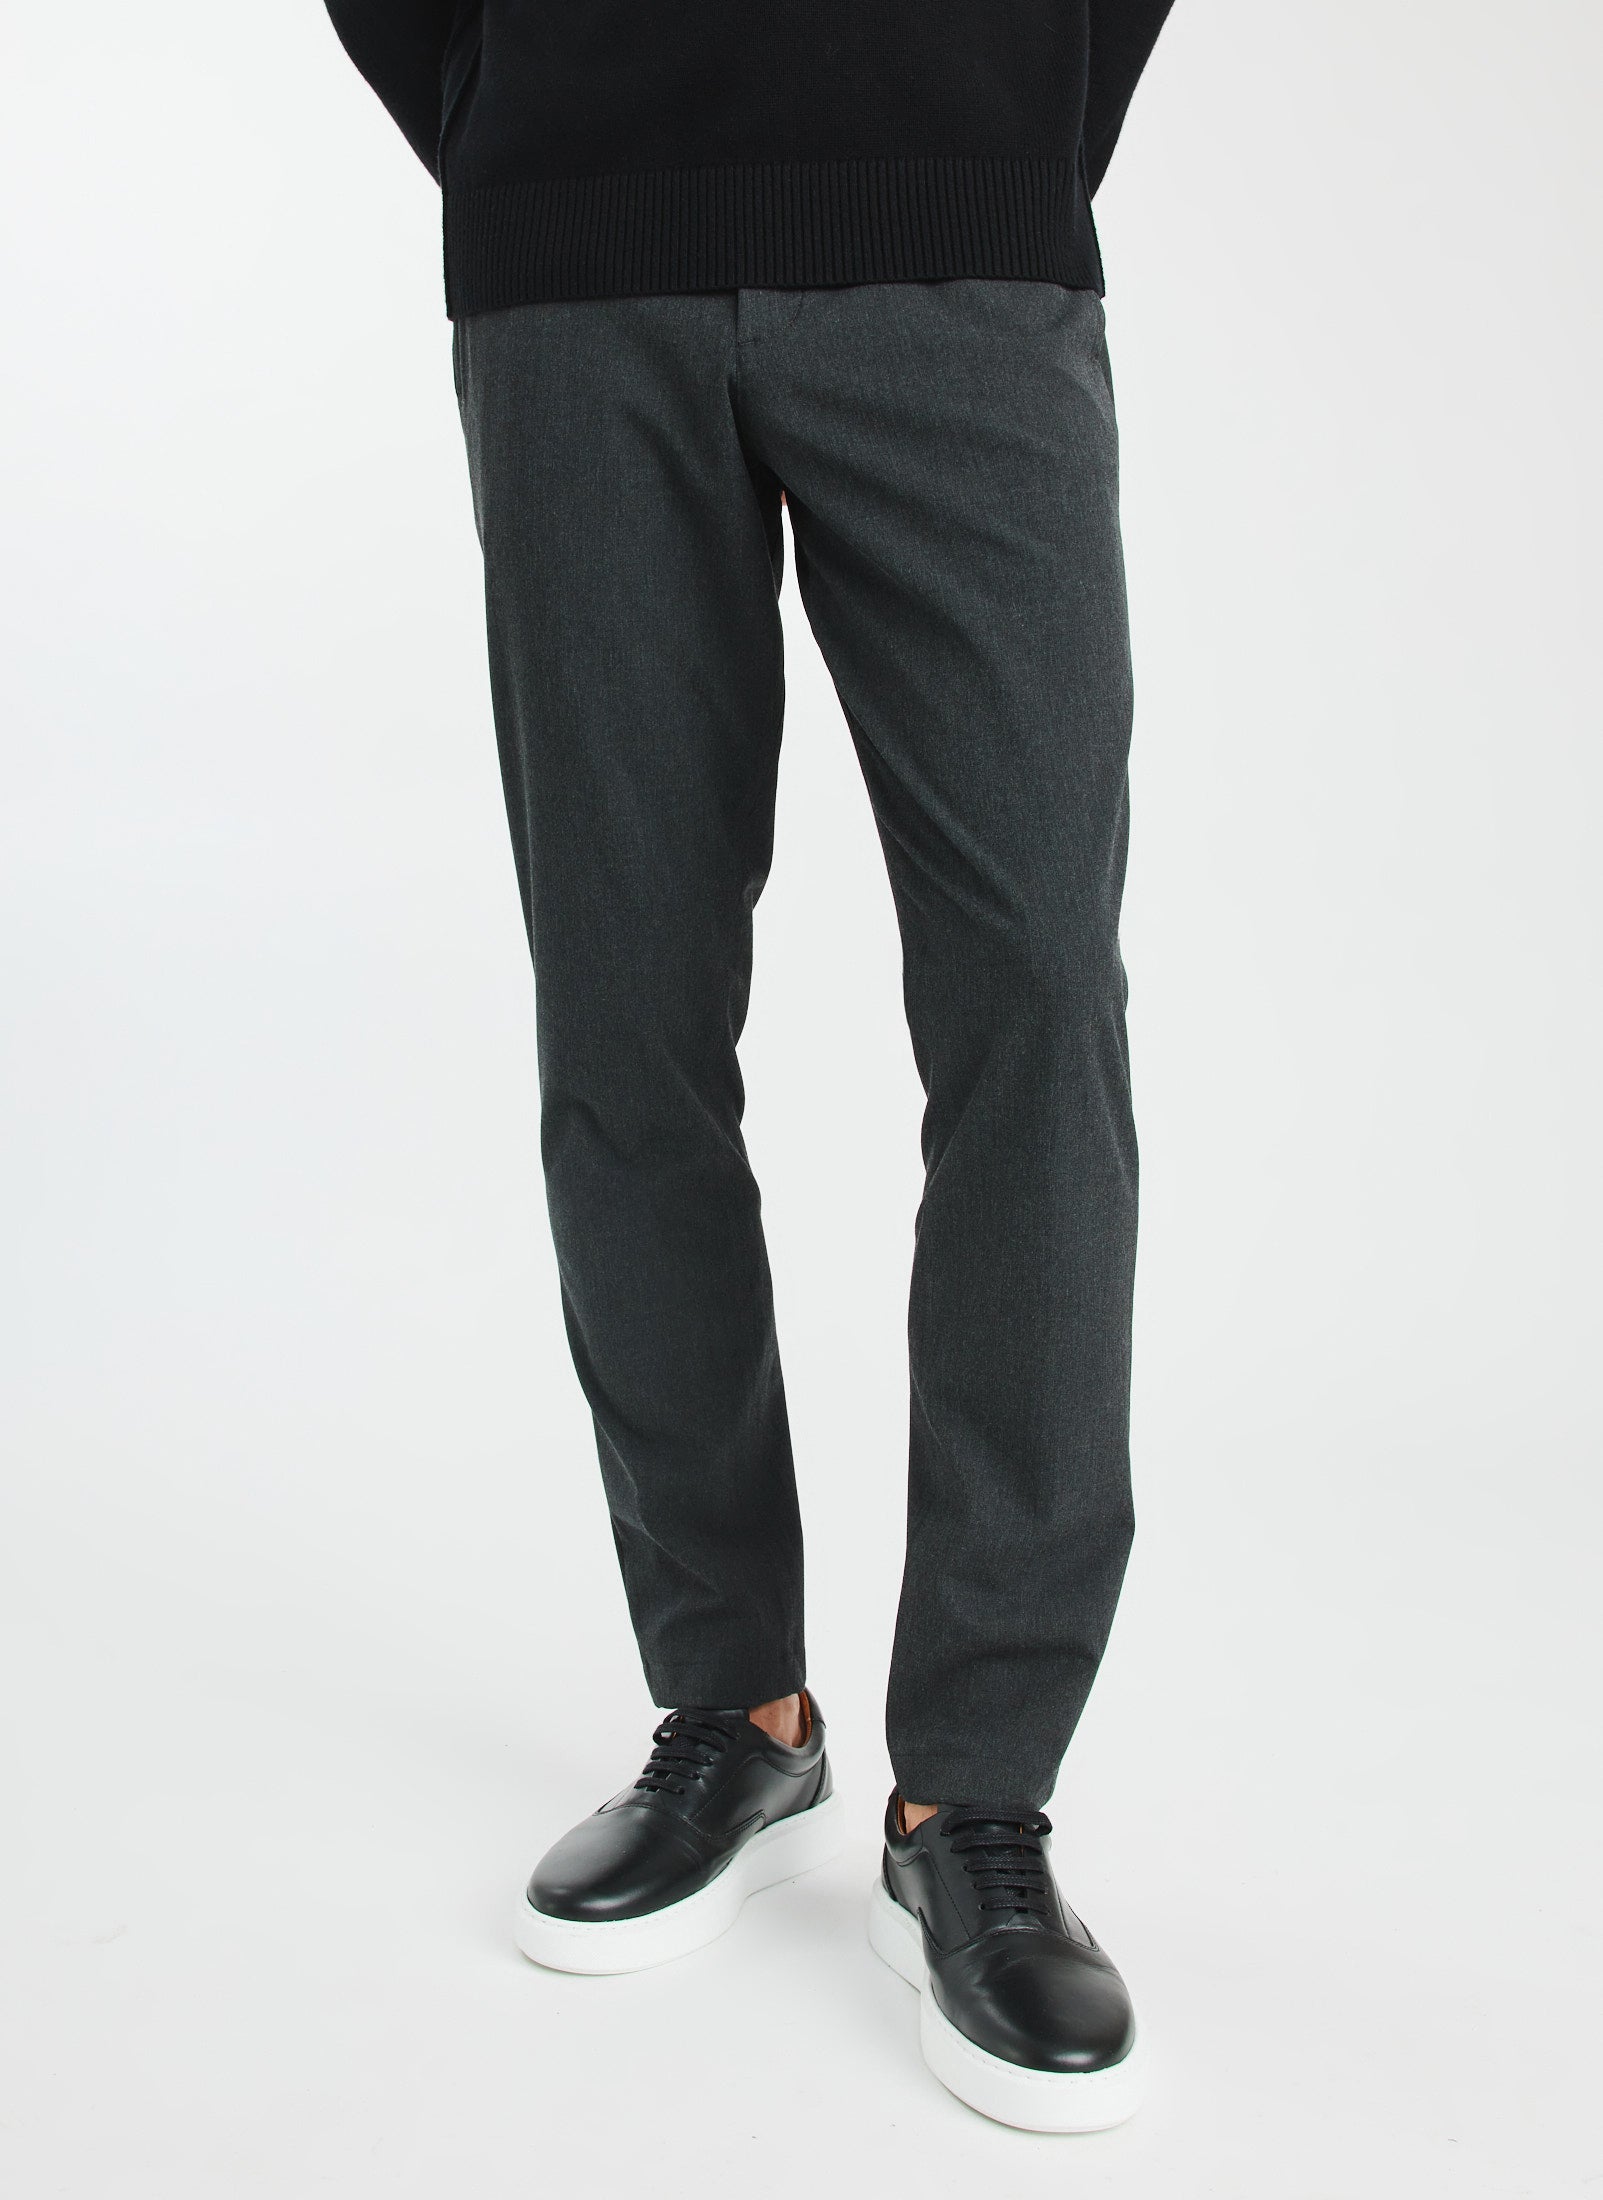 Regular Fit Charcoal Stretch Trousers